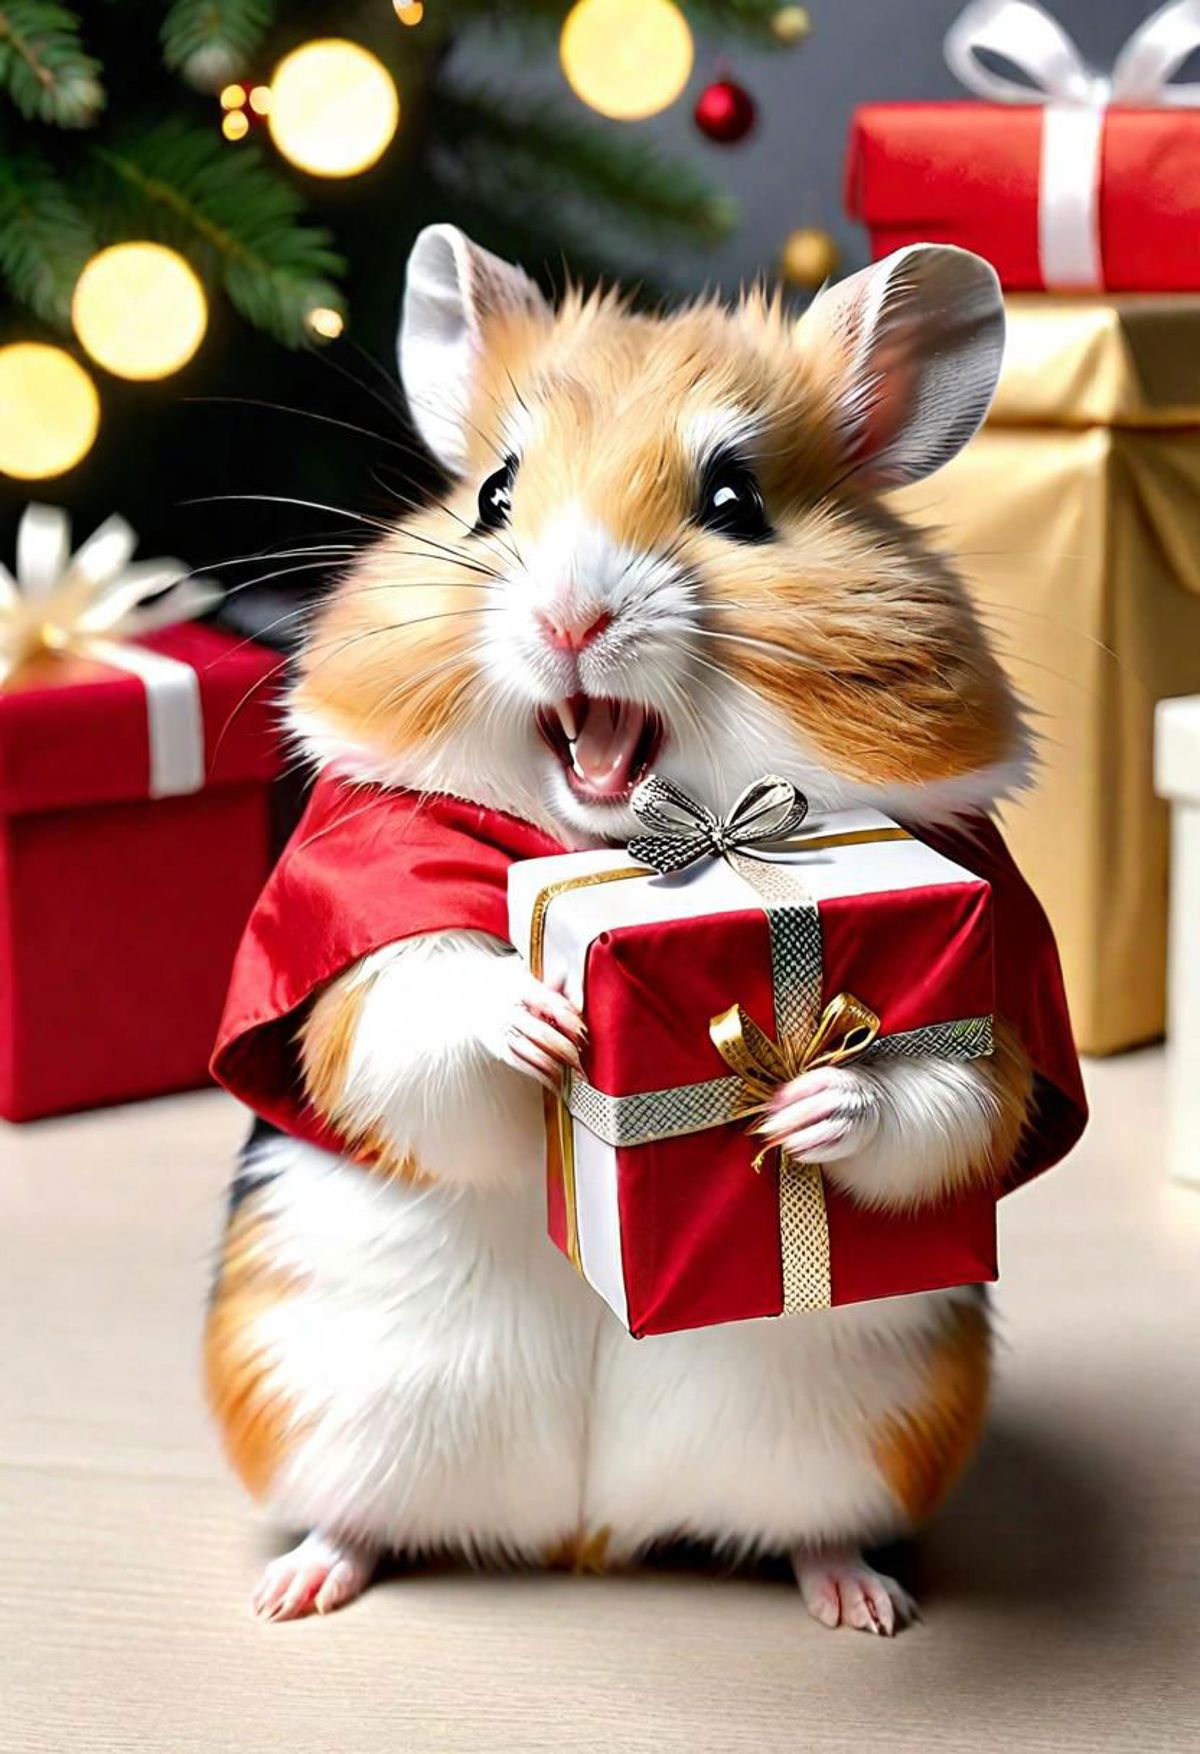 A hamster in a red robe holding a gift.